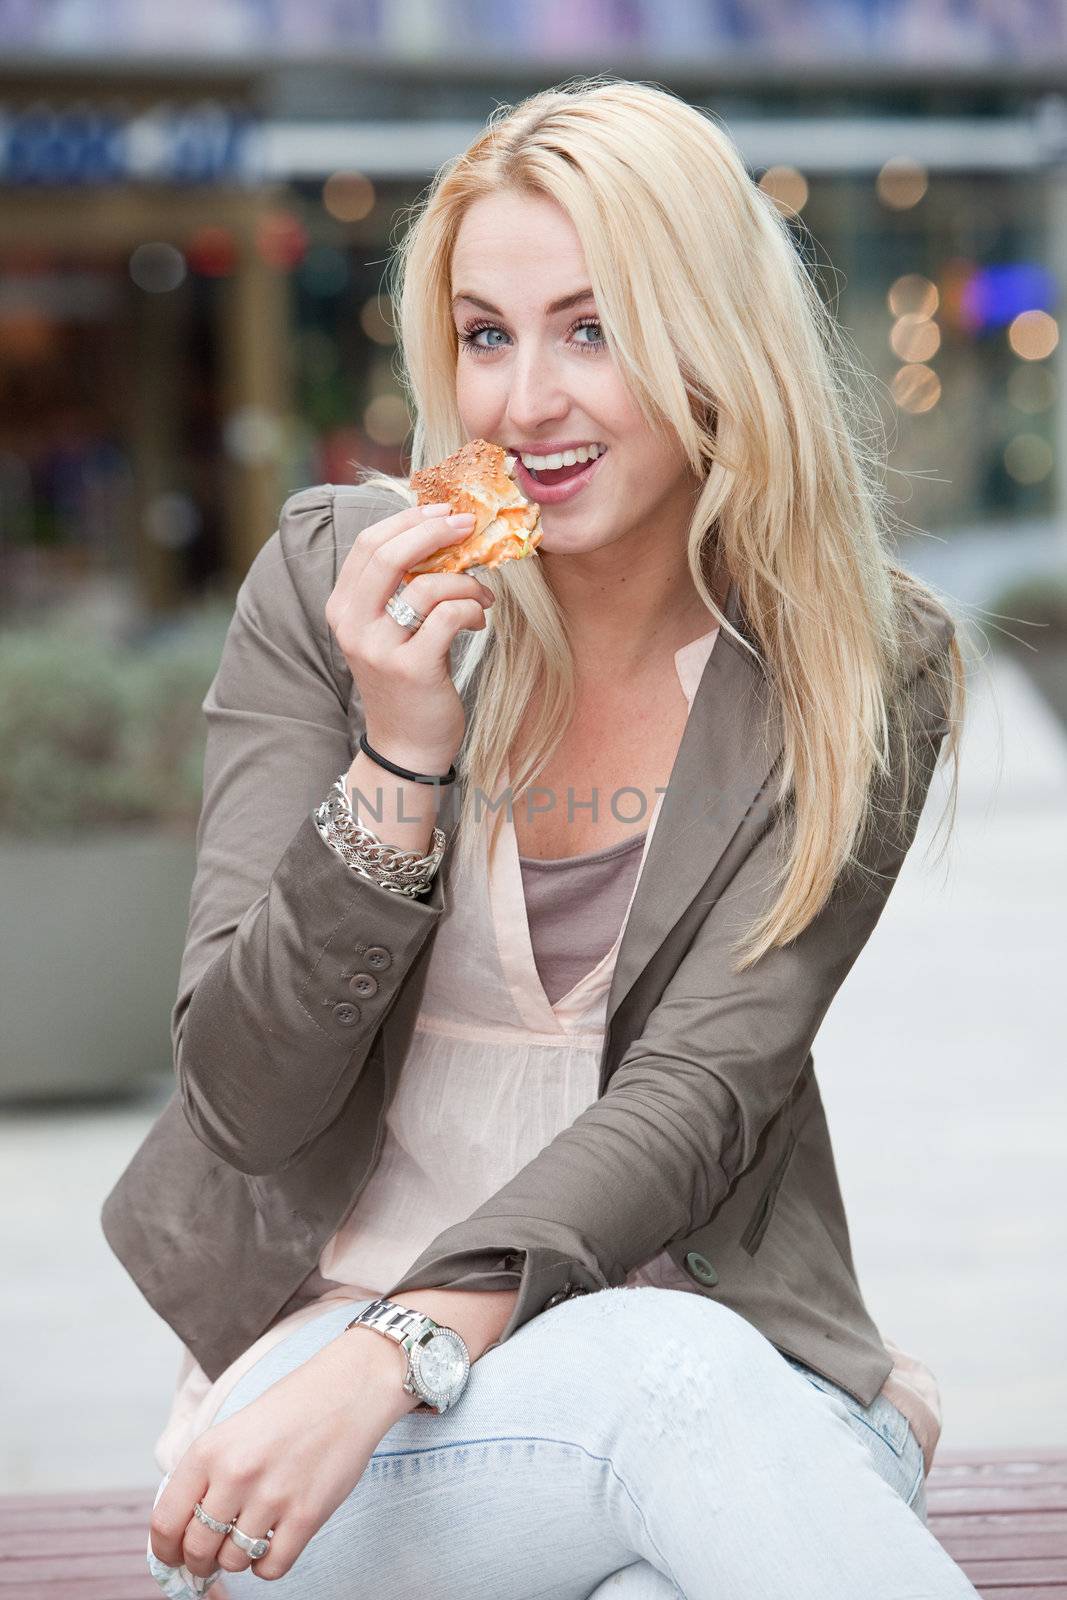 Beautiful young blond girl eating a hamburger and looking happy